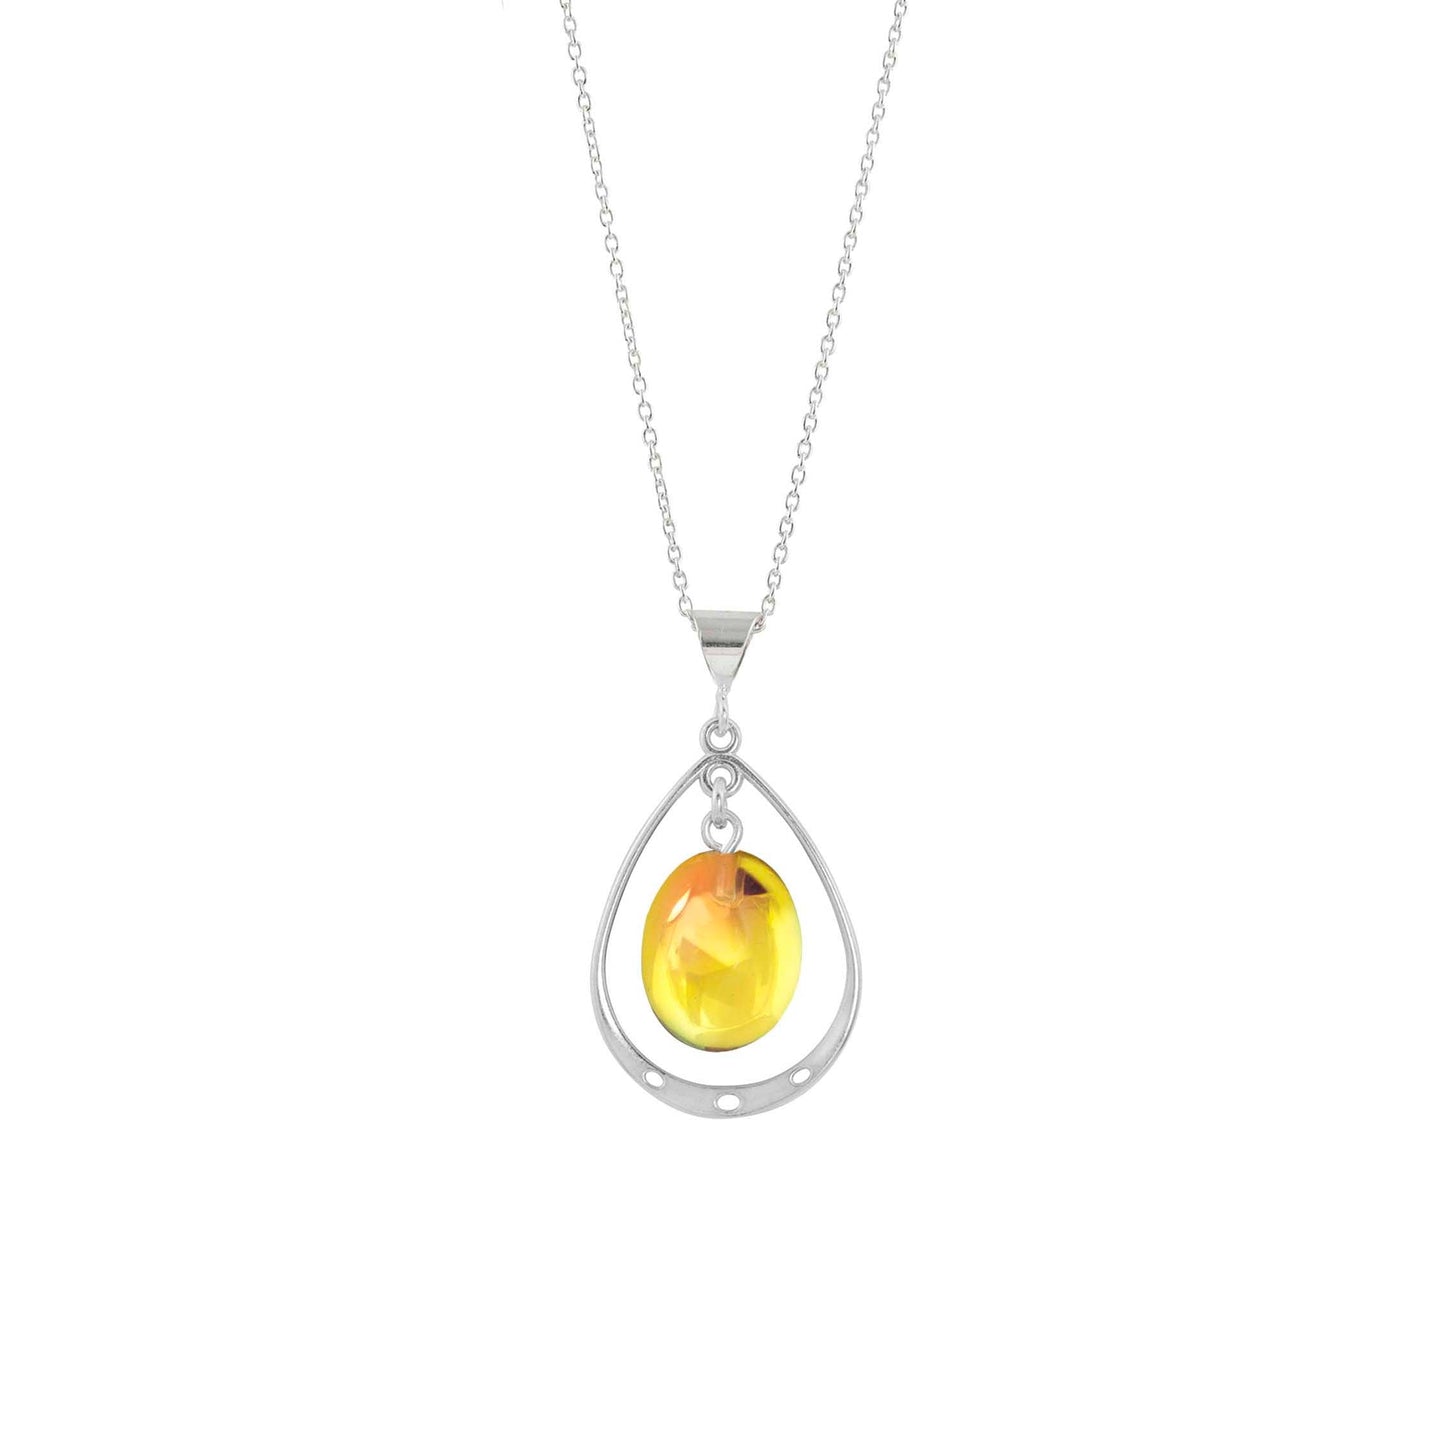 Oval Crystal with Sterling Silver Loop Pendant - Fire